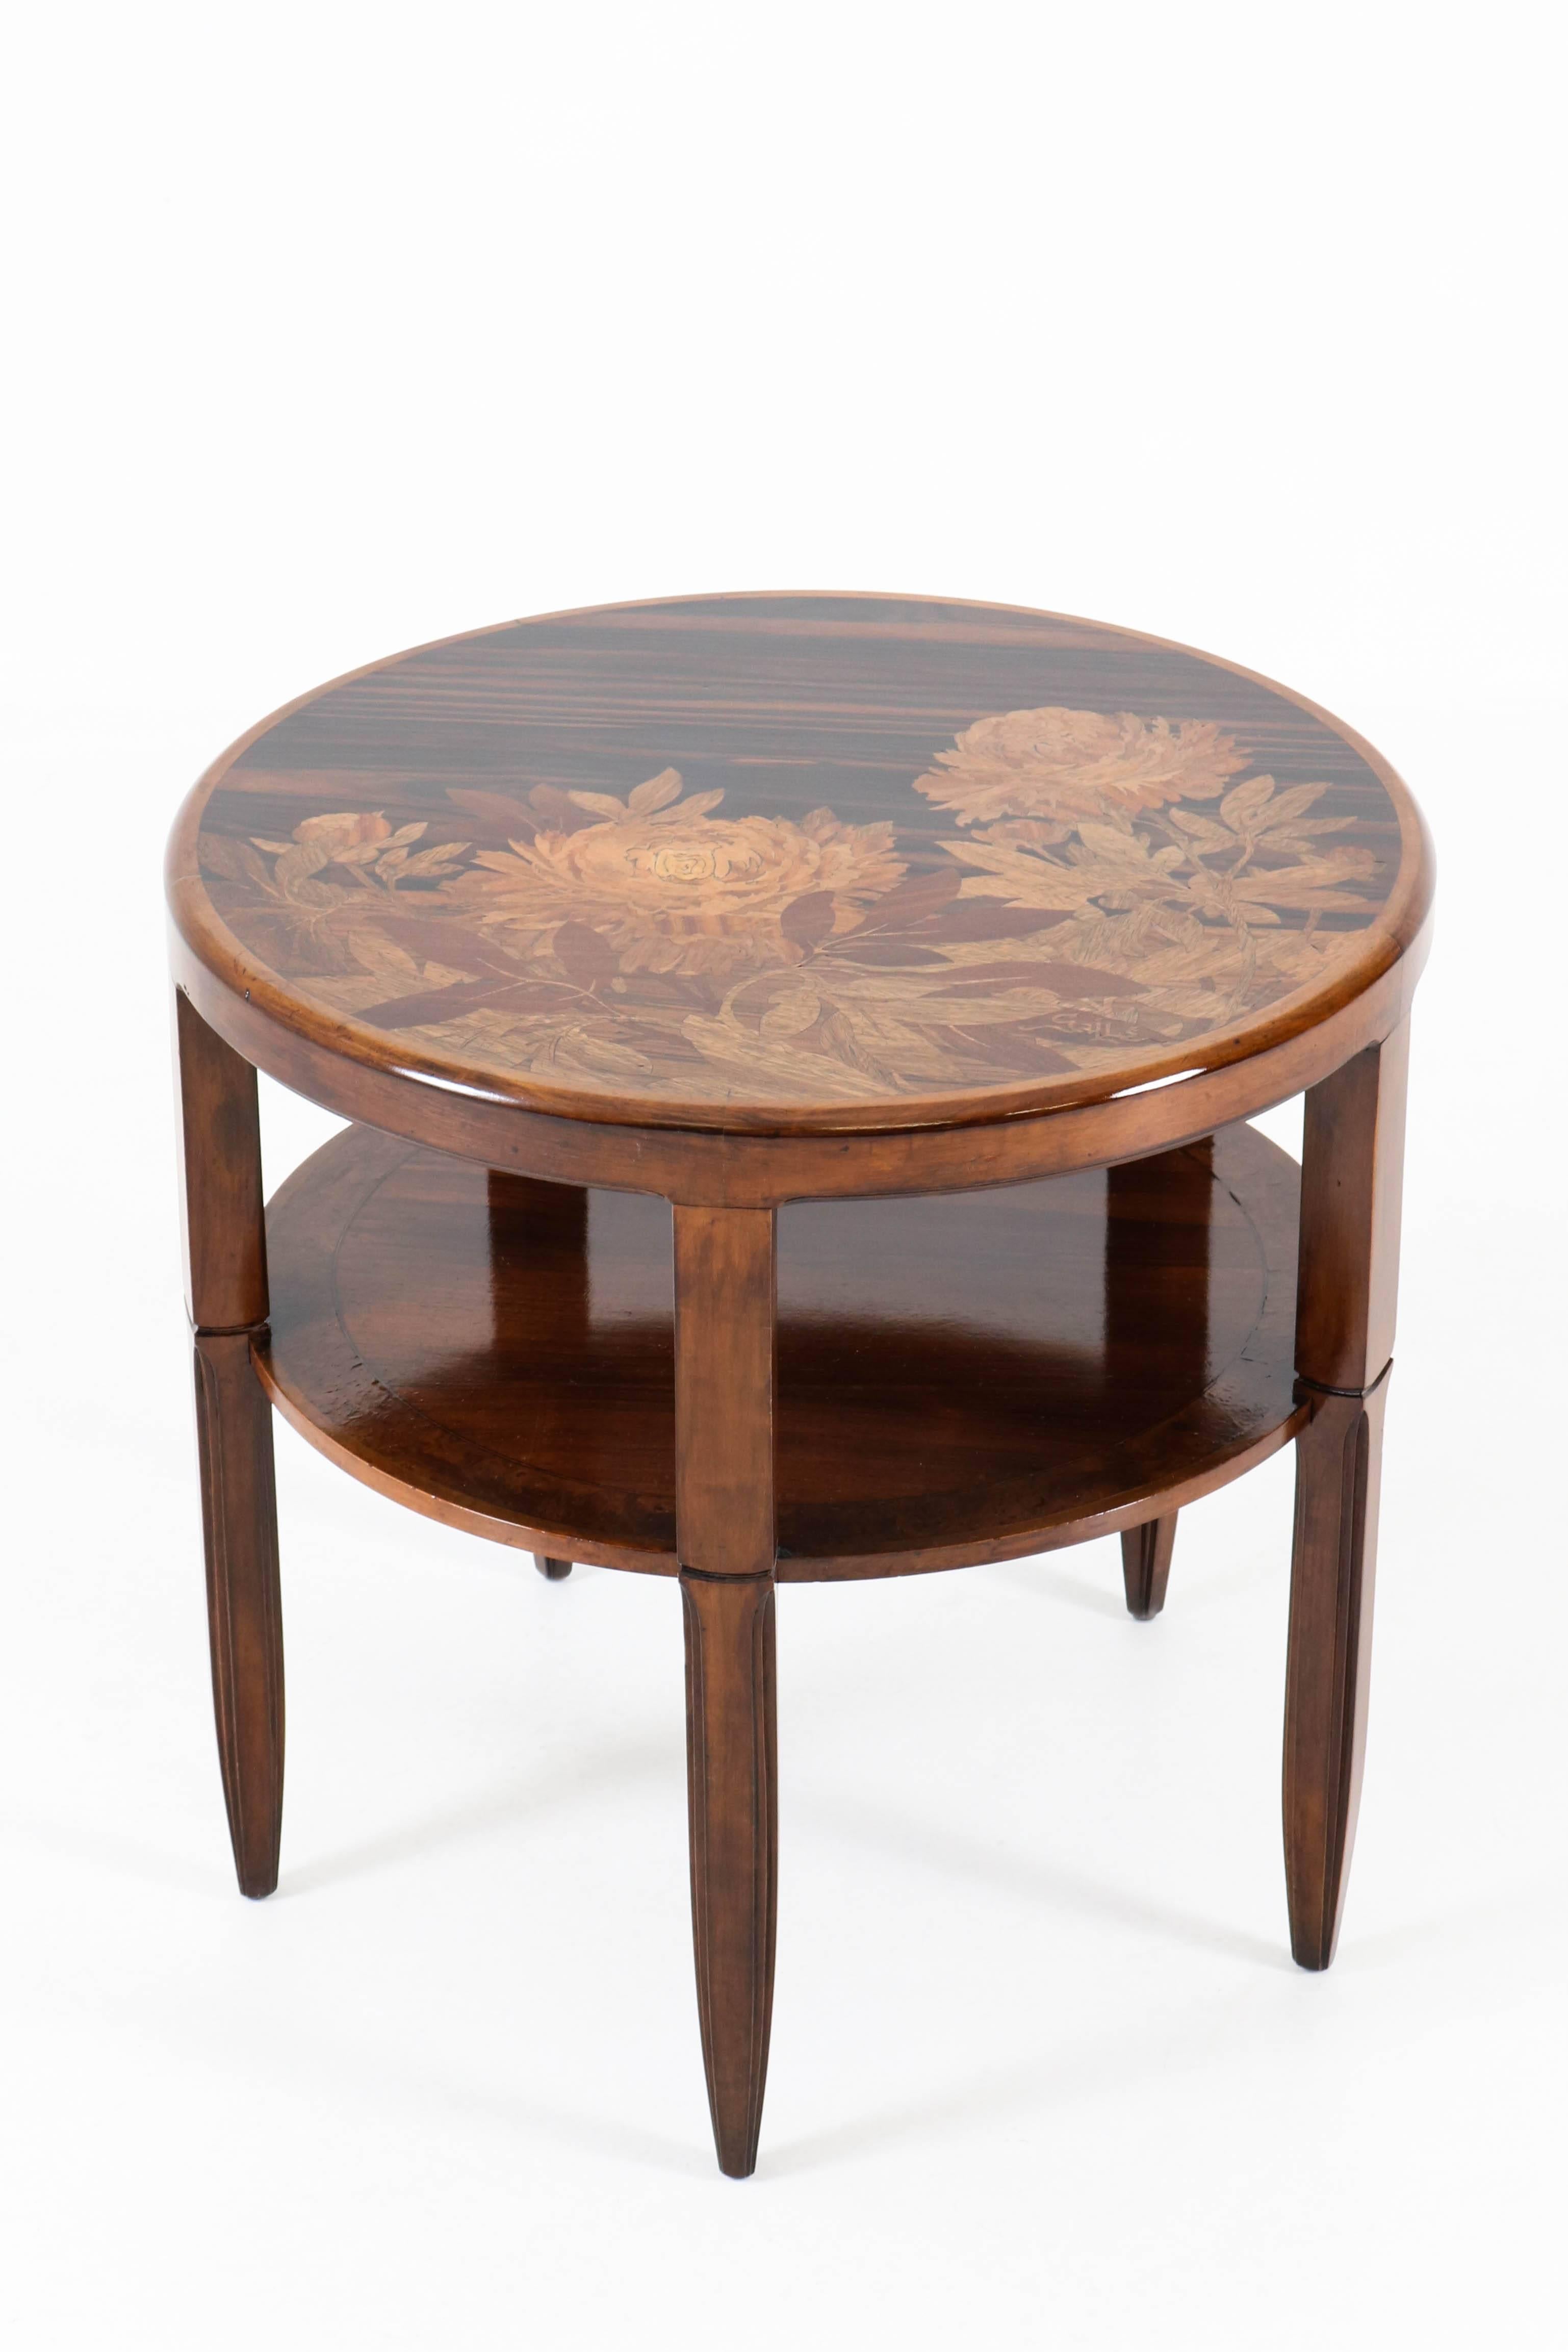 Stunning French Art Nouveau marquetry table by Emile Gallé, 1900s
Walnut and Macassar ebony.
Signed Gallé on top.
In good original refinished condition with minor wear consistent with age and use,
preserving a beautiful patina.